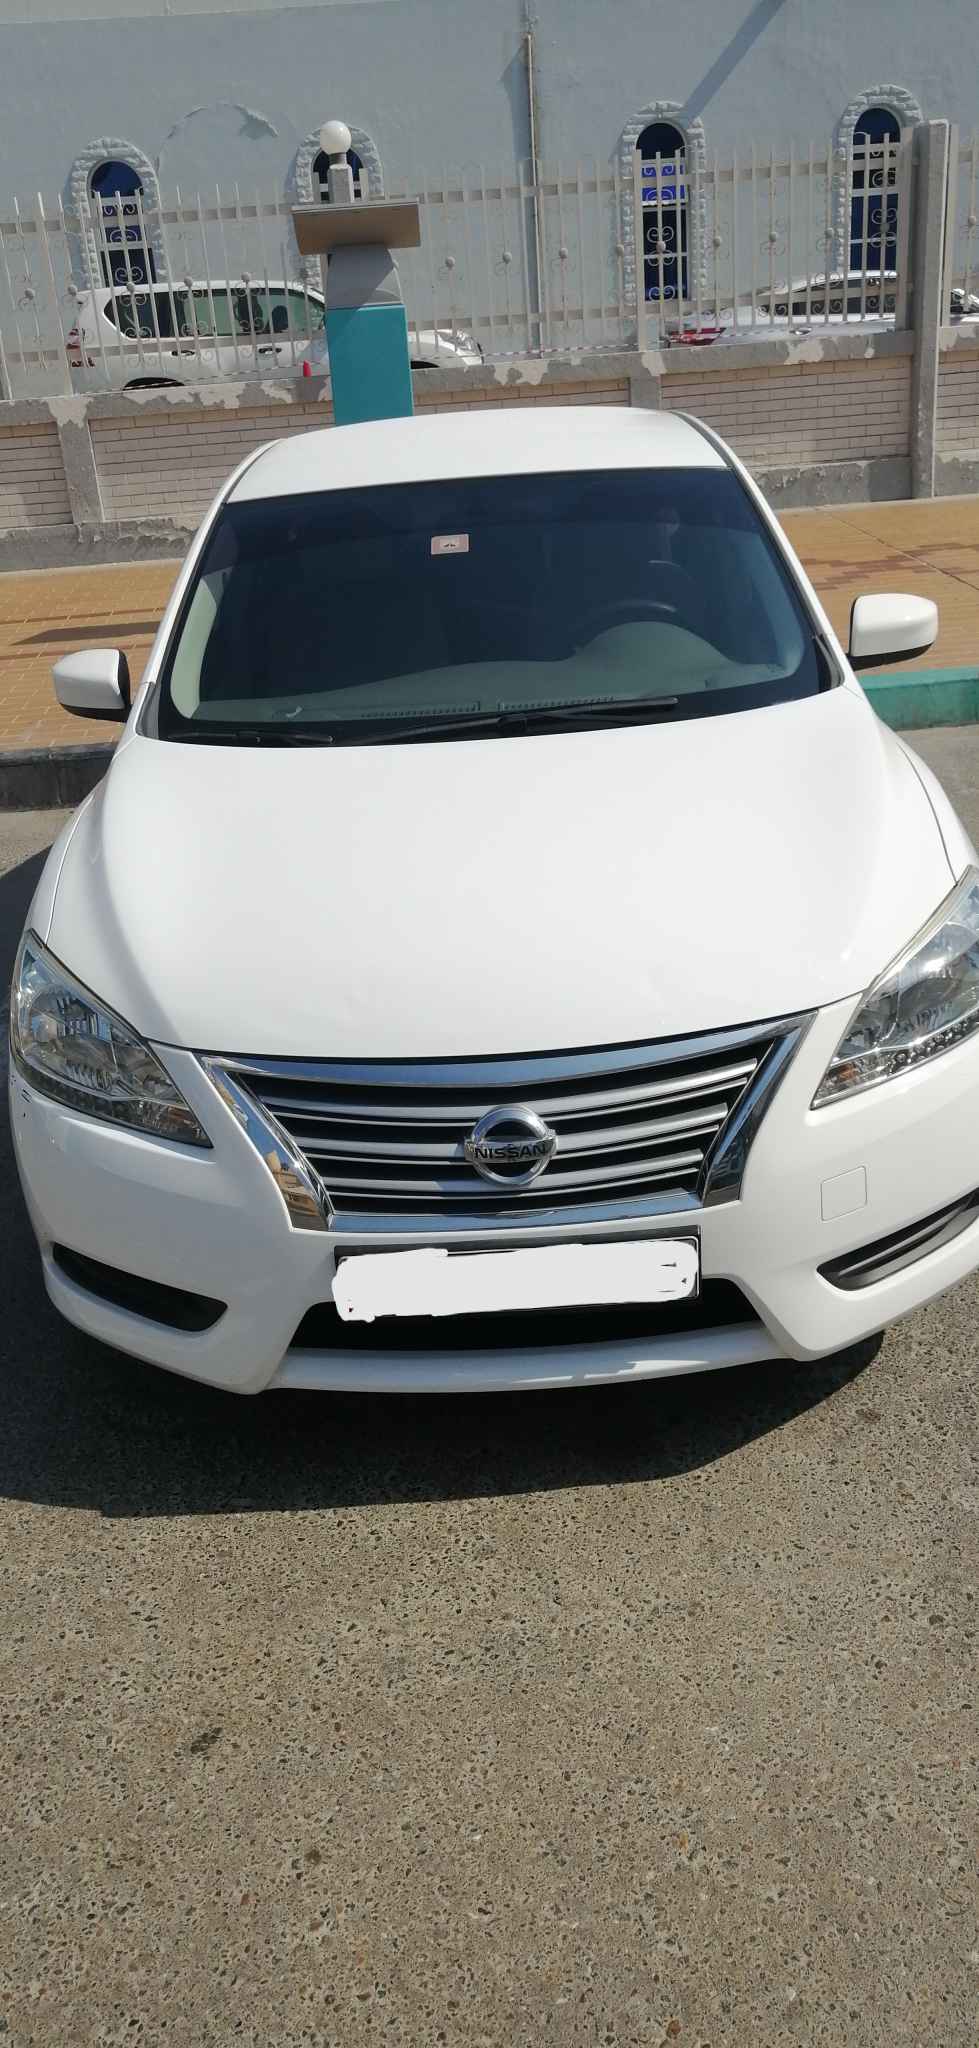 Nissan-Sentra-2014 1-6L Extronic CVT Gcc-specs-single owner DOCTOR in AbuDhabi Less driven-41500km only-for-26500dh 0552929702